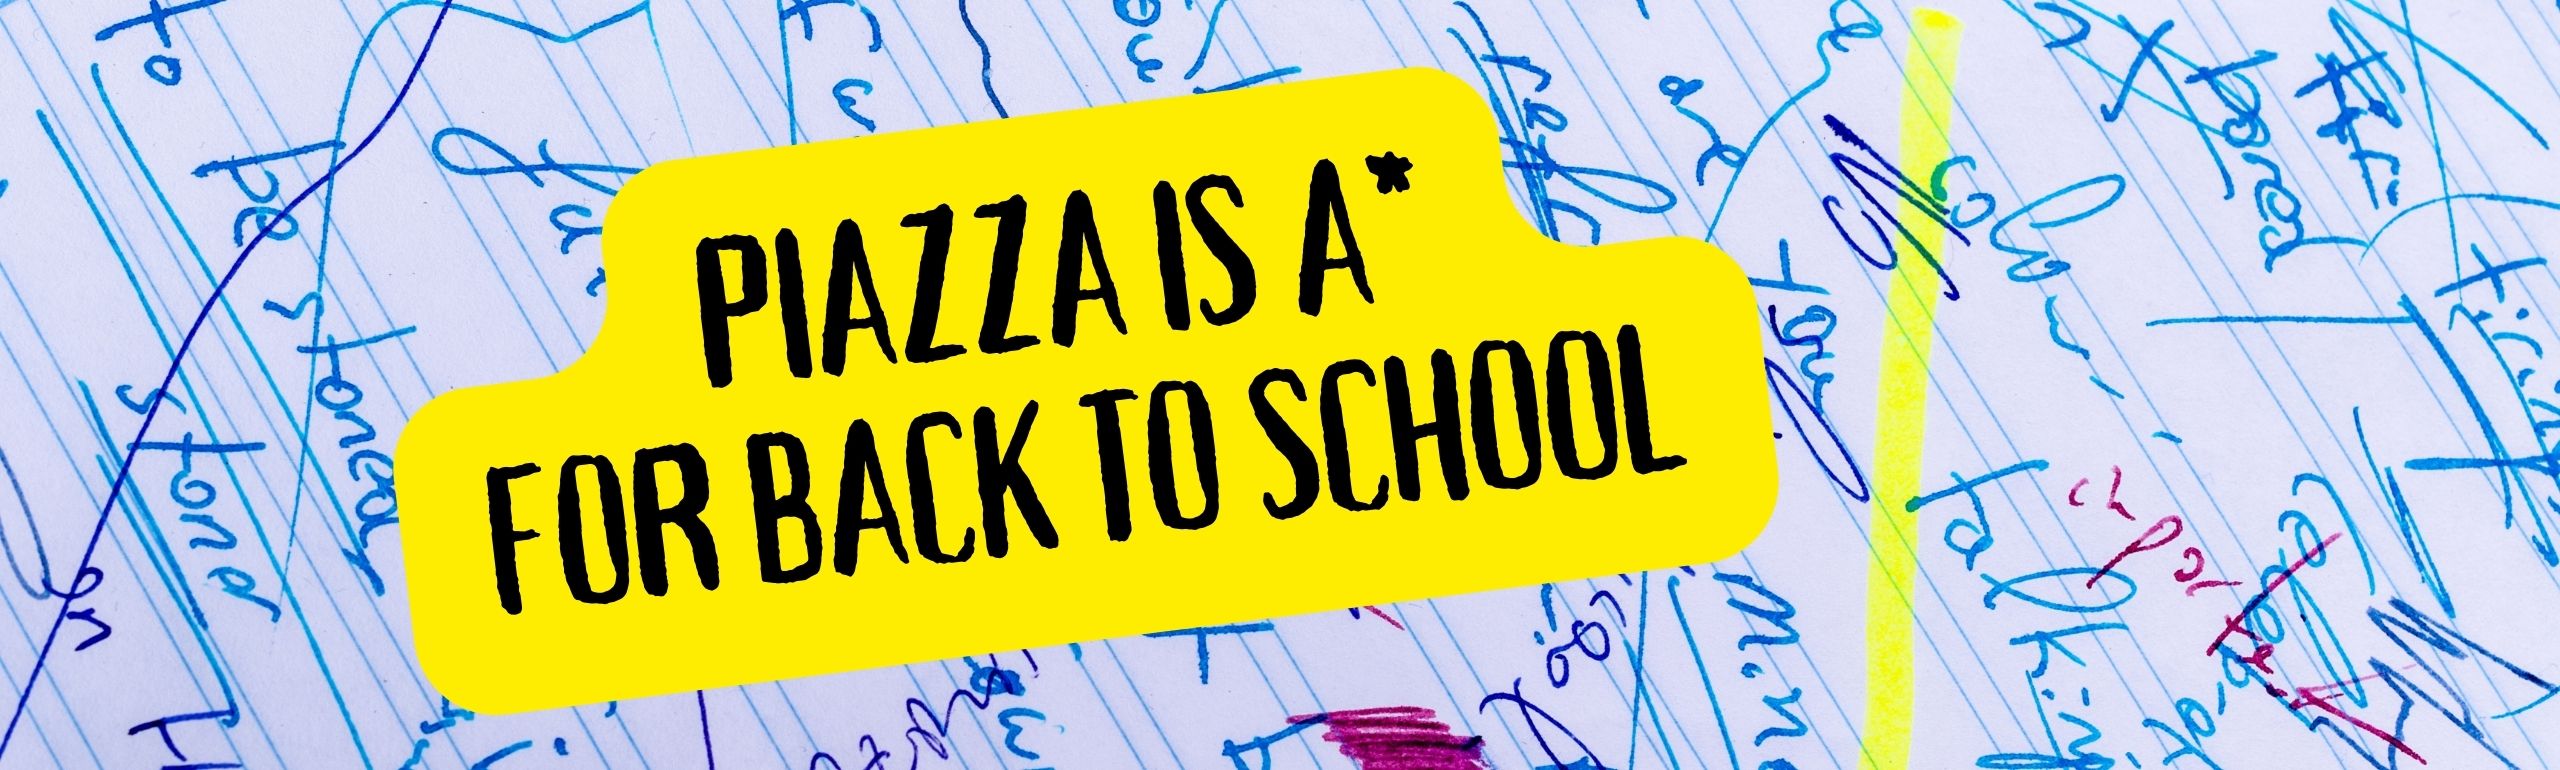 PIAZZA IS A FOR BACK TO SCHOOL